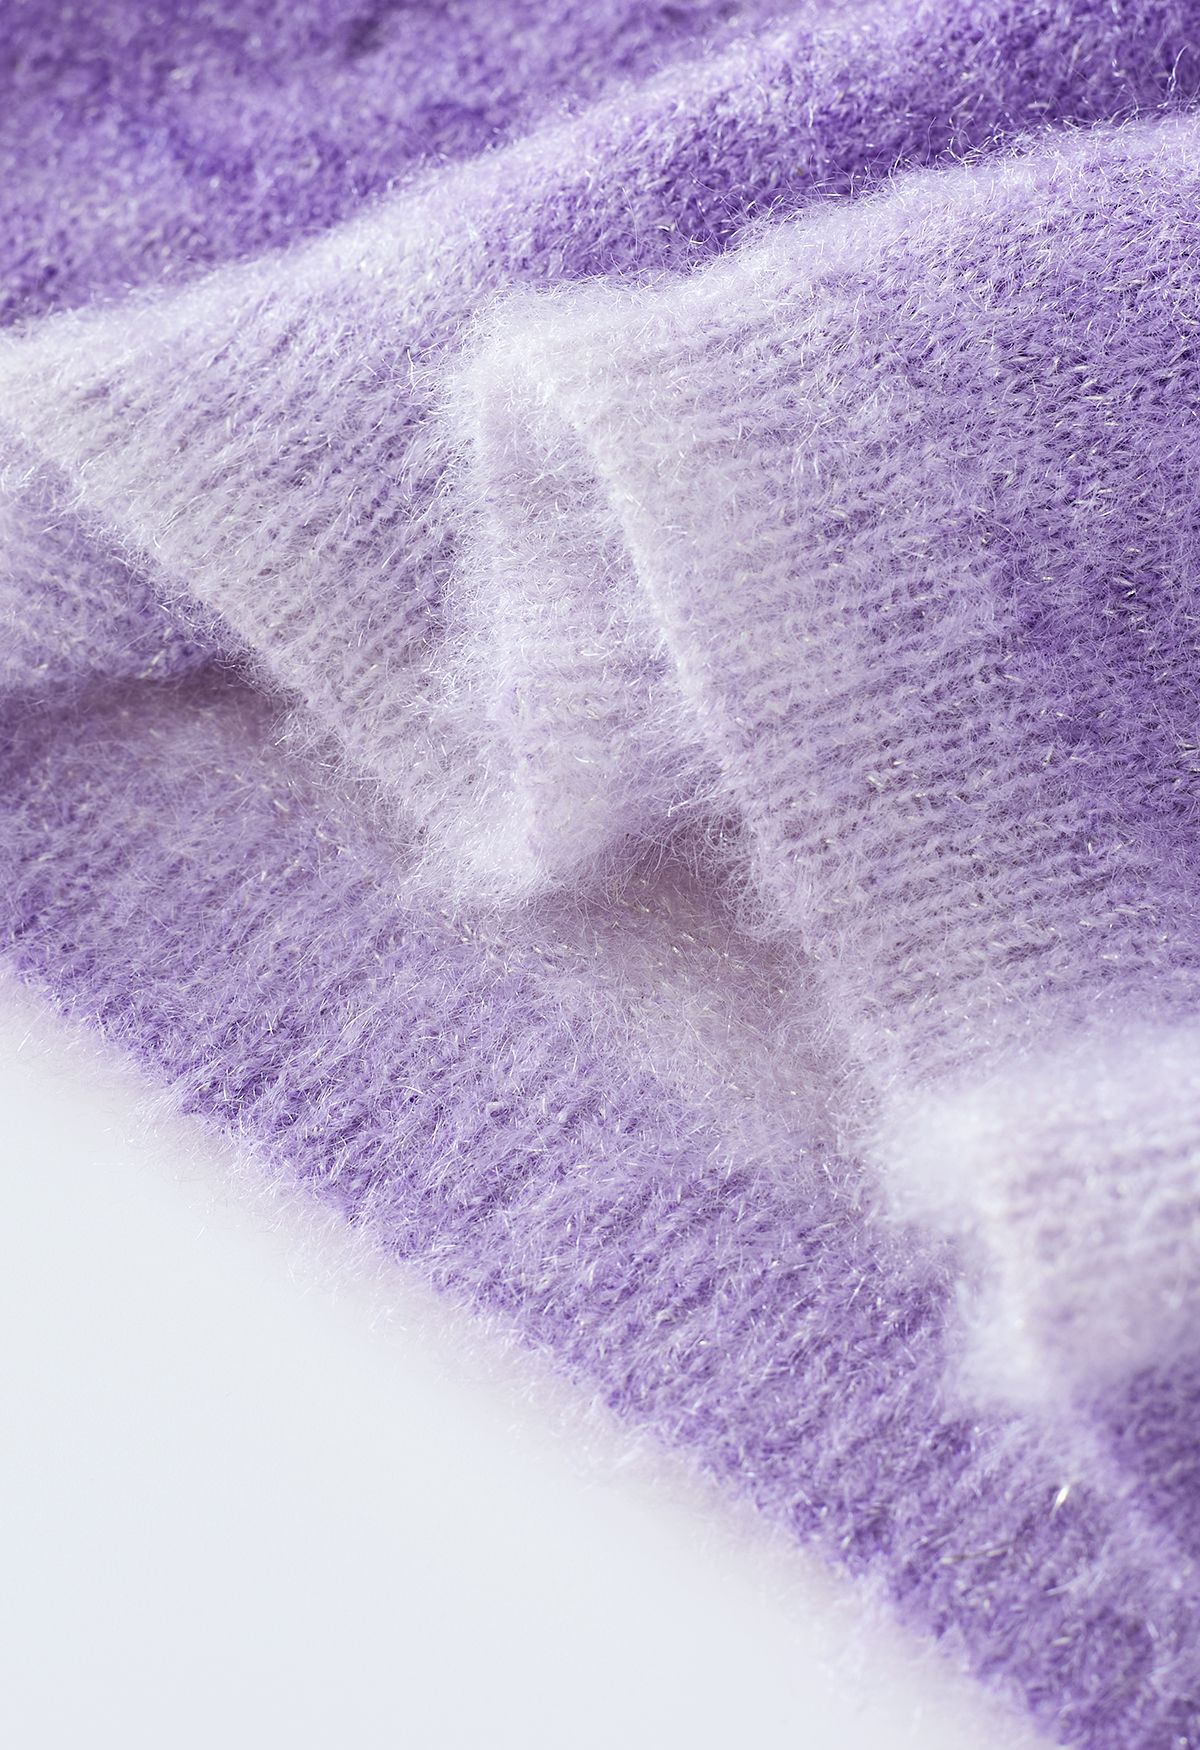 Ombre Eyelet Fuzzy Crop Sweater in Lilac